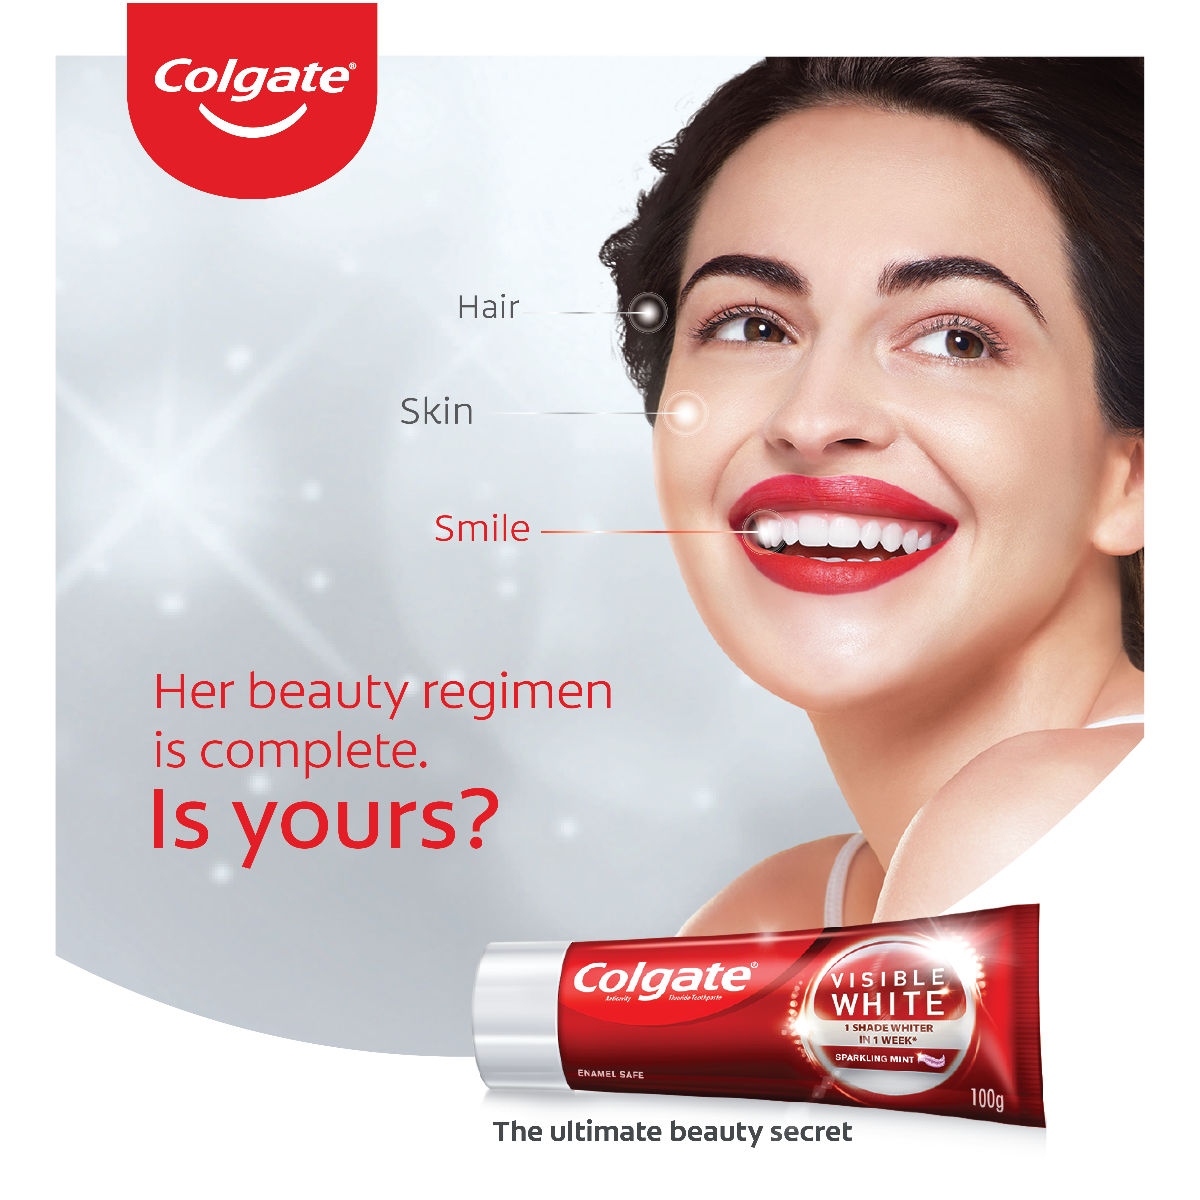 Colgate Visible White Sparkling Mint Toothpaste, 50 gm, Pack of 1 